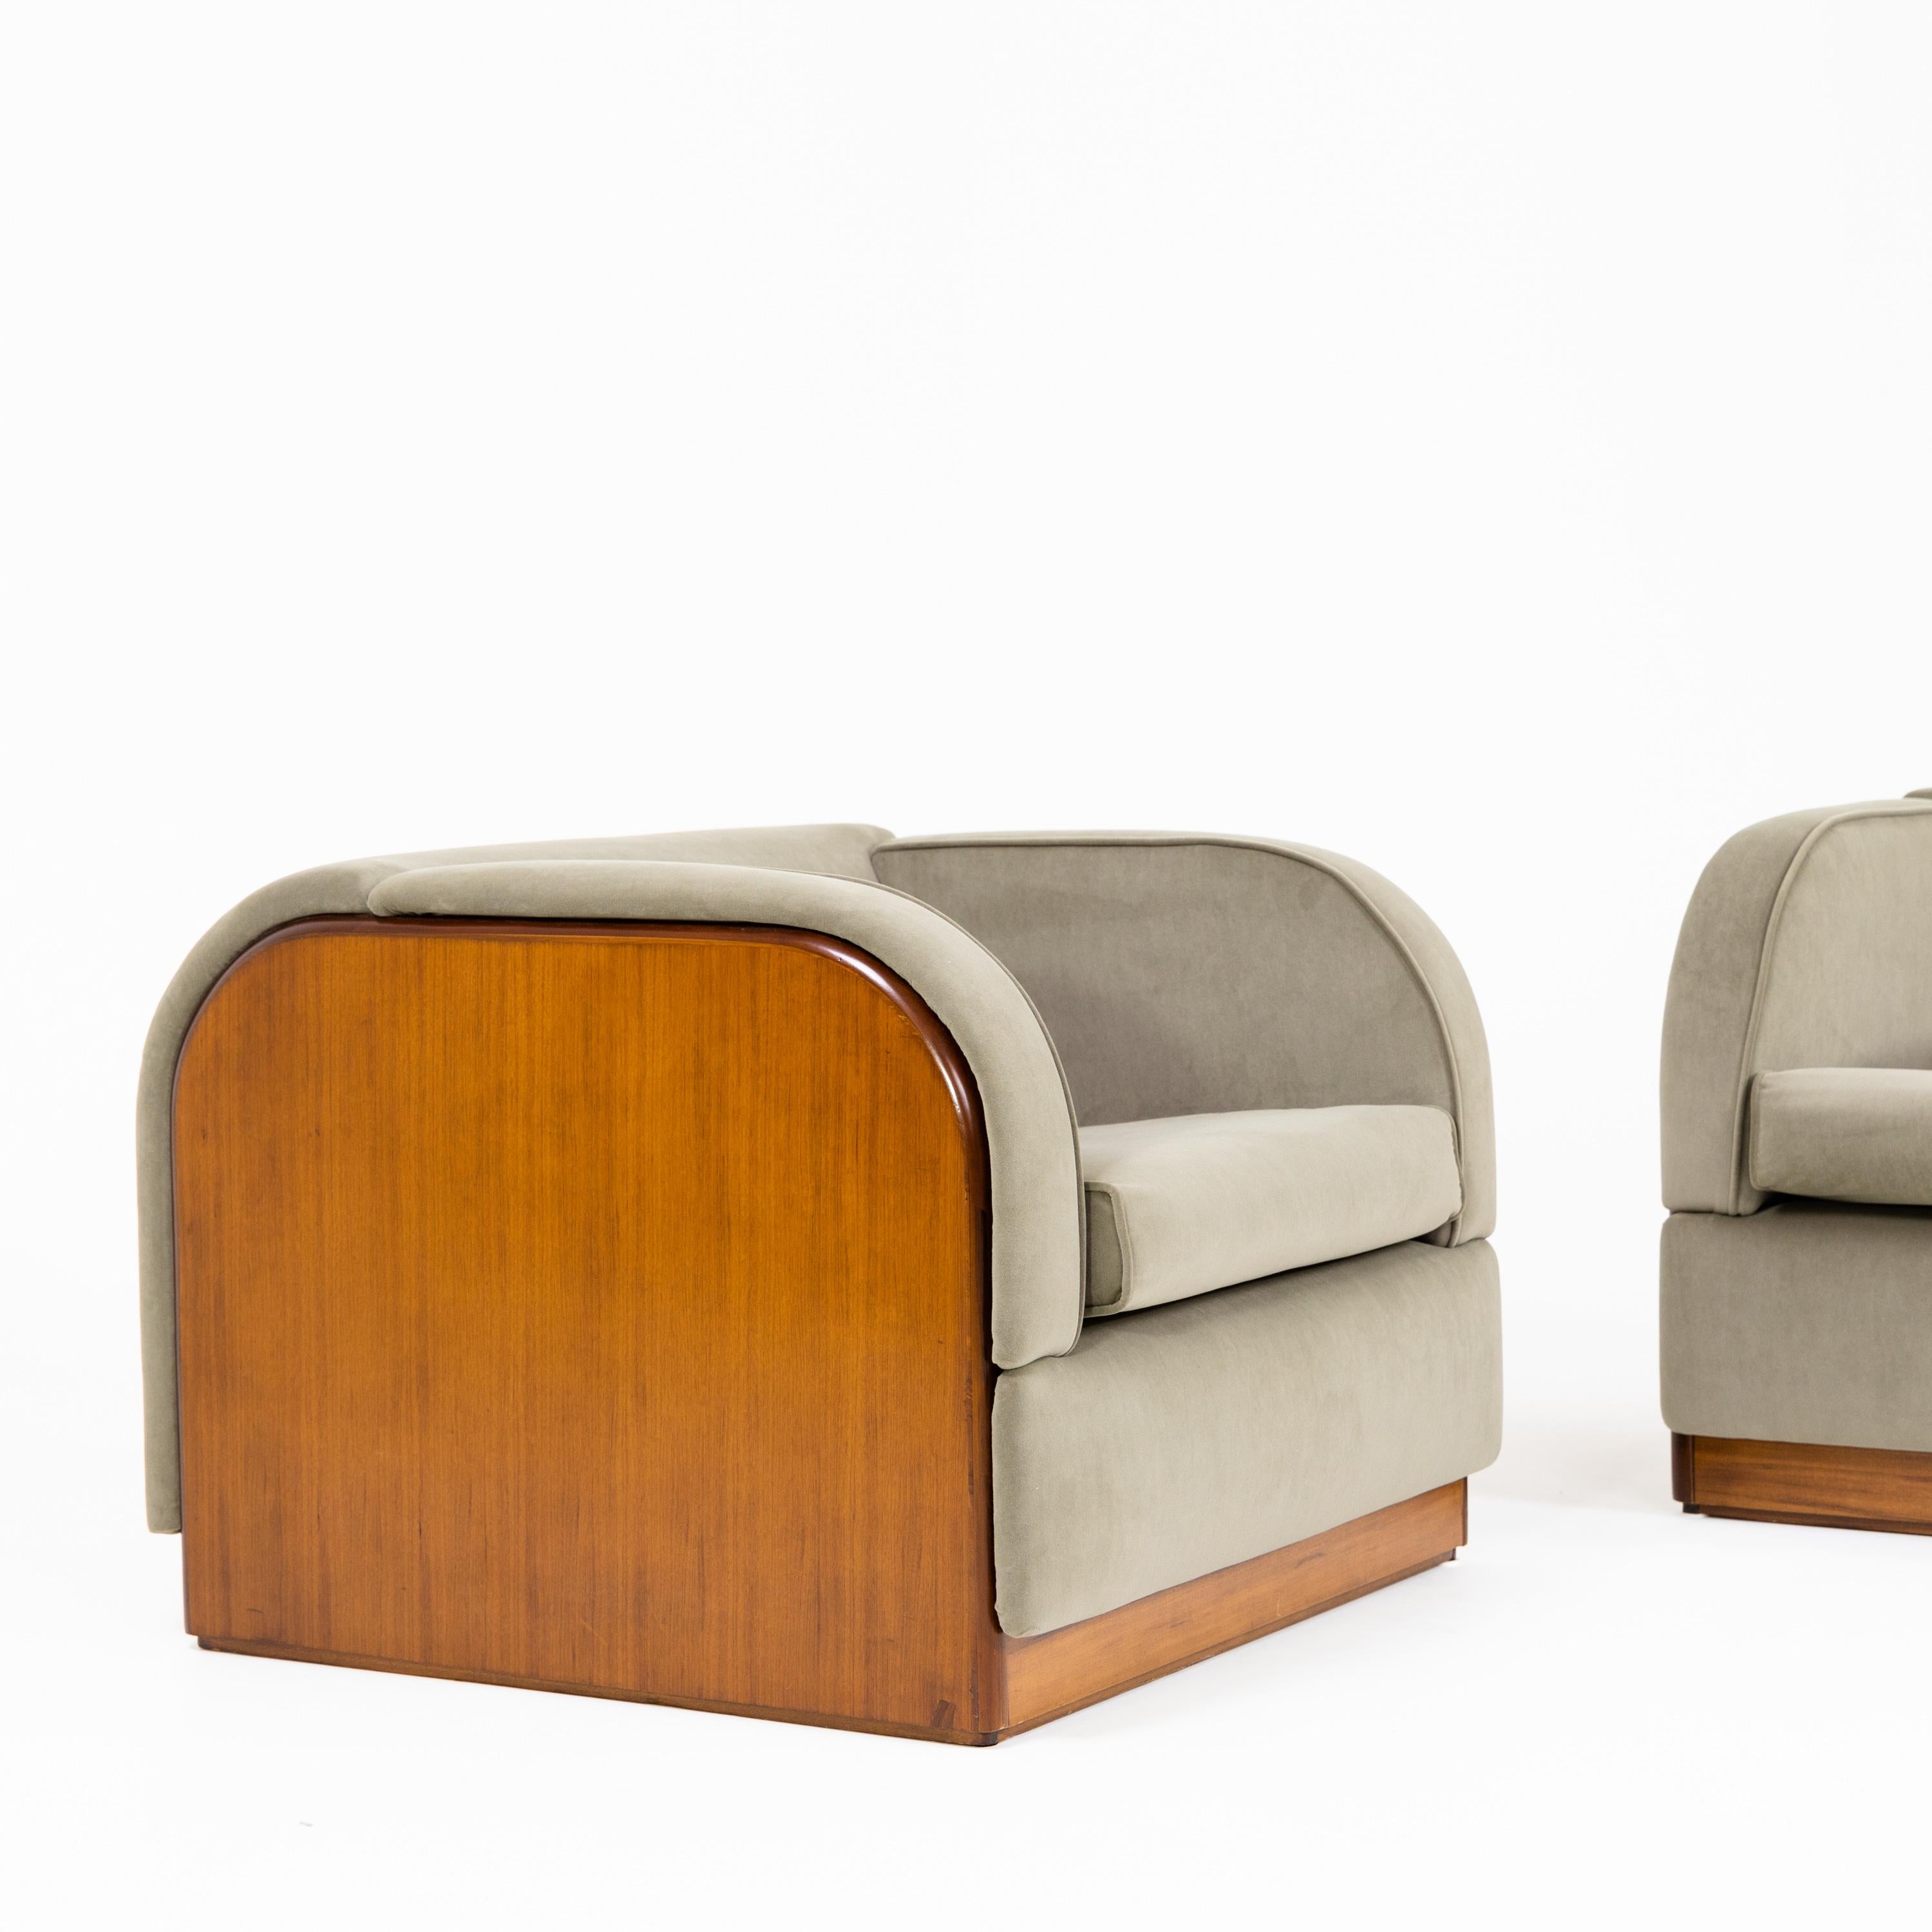 Pair of lounge armchairs in cubic form with upholstered seats, arm and back rests. The veneered side panels are rounded, and the back is also upholstered and reupholstered in a green velvety fabric.